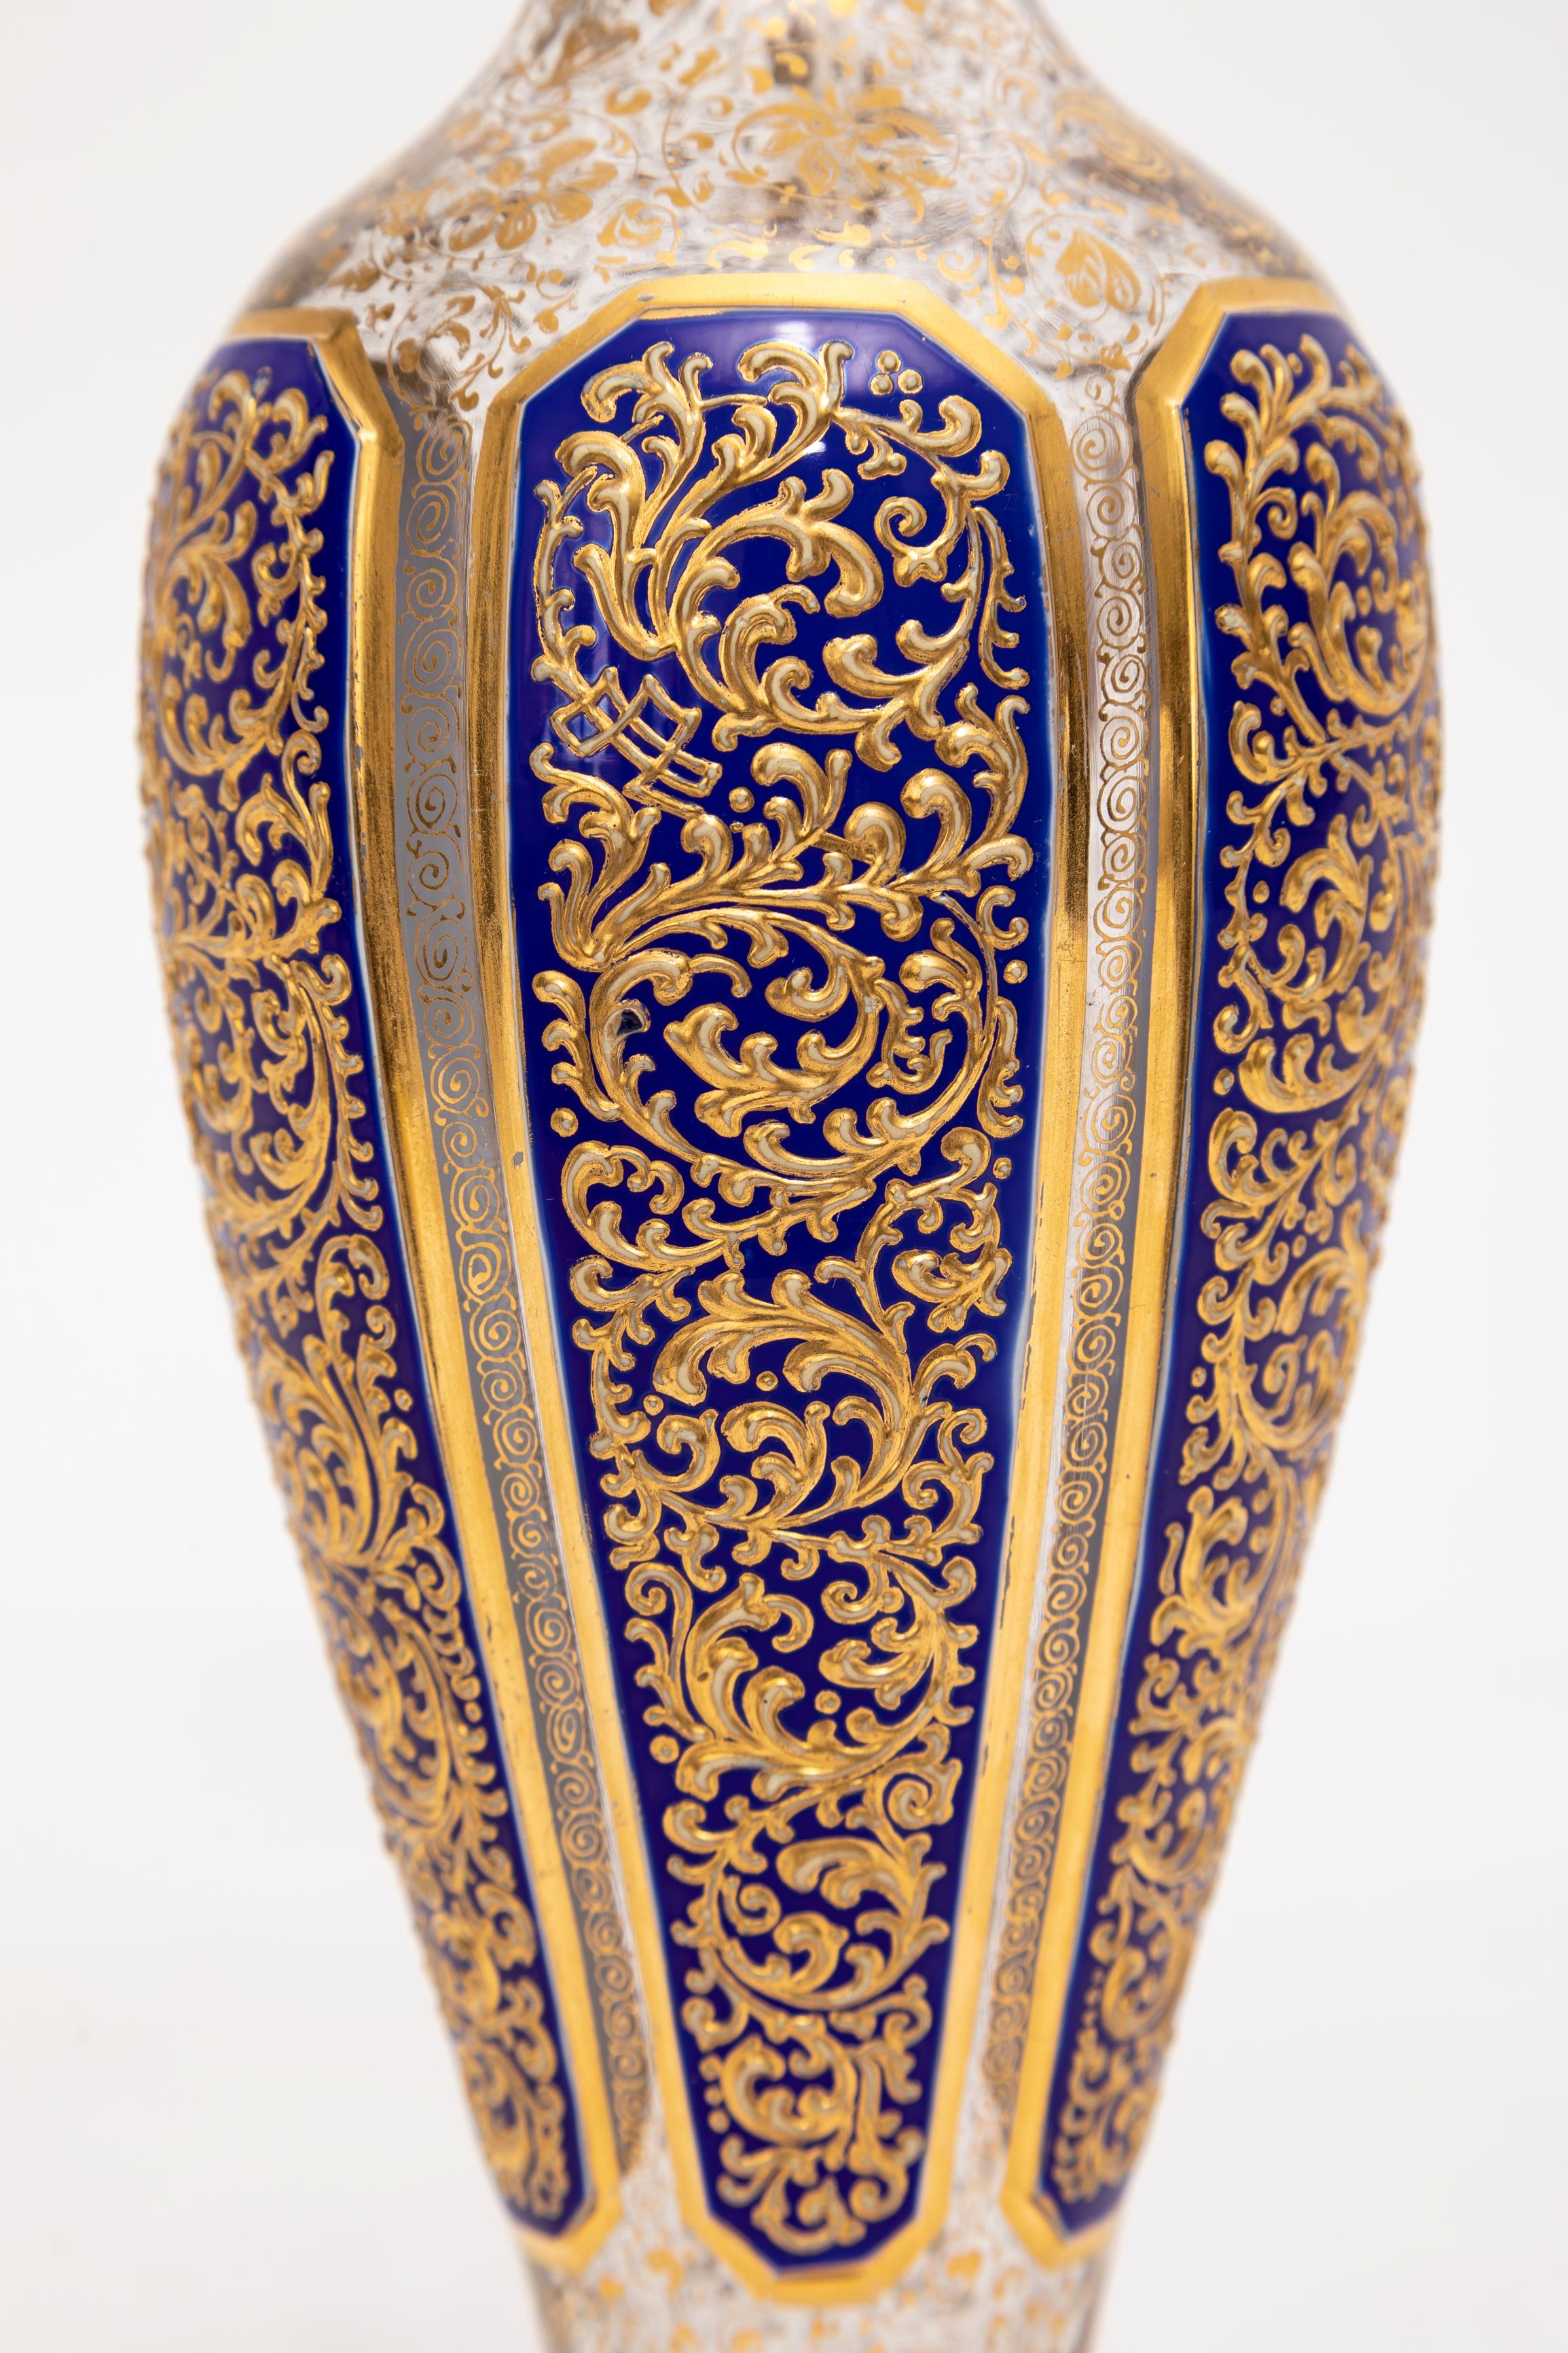 Crystal Pair 19th C. Moser Cobalt Blue Cut-to-Clear Gold Floral Decorated Vases, Islamic